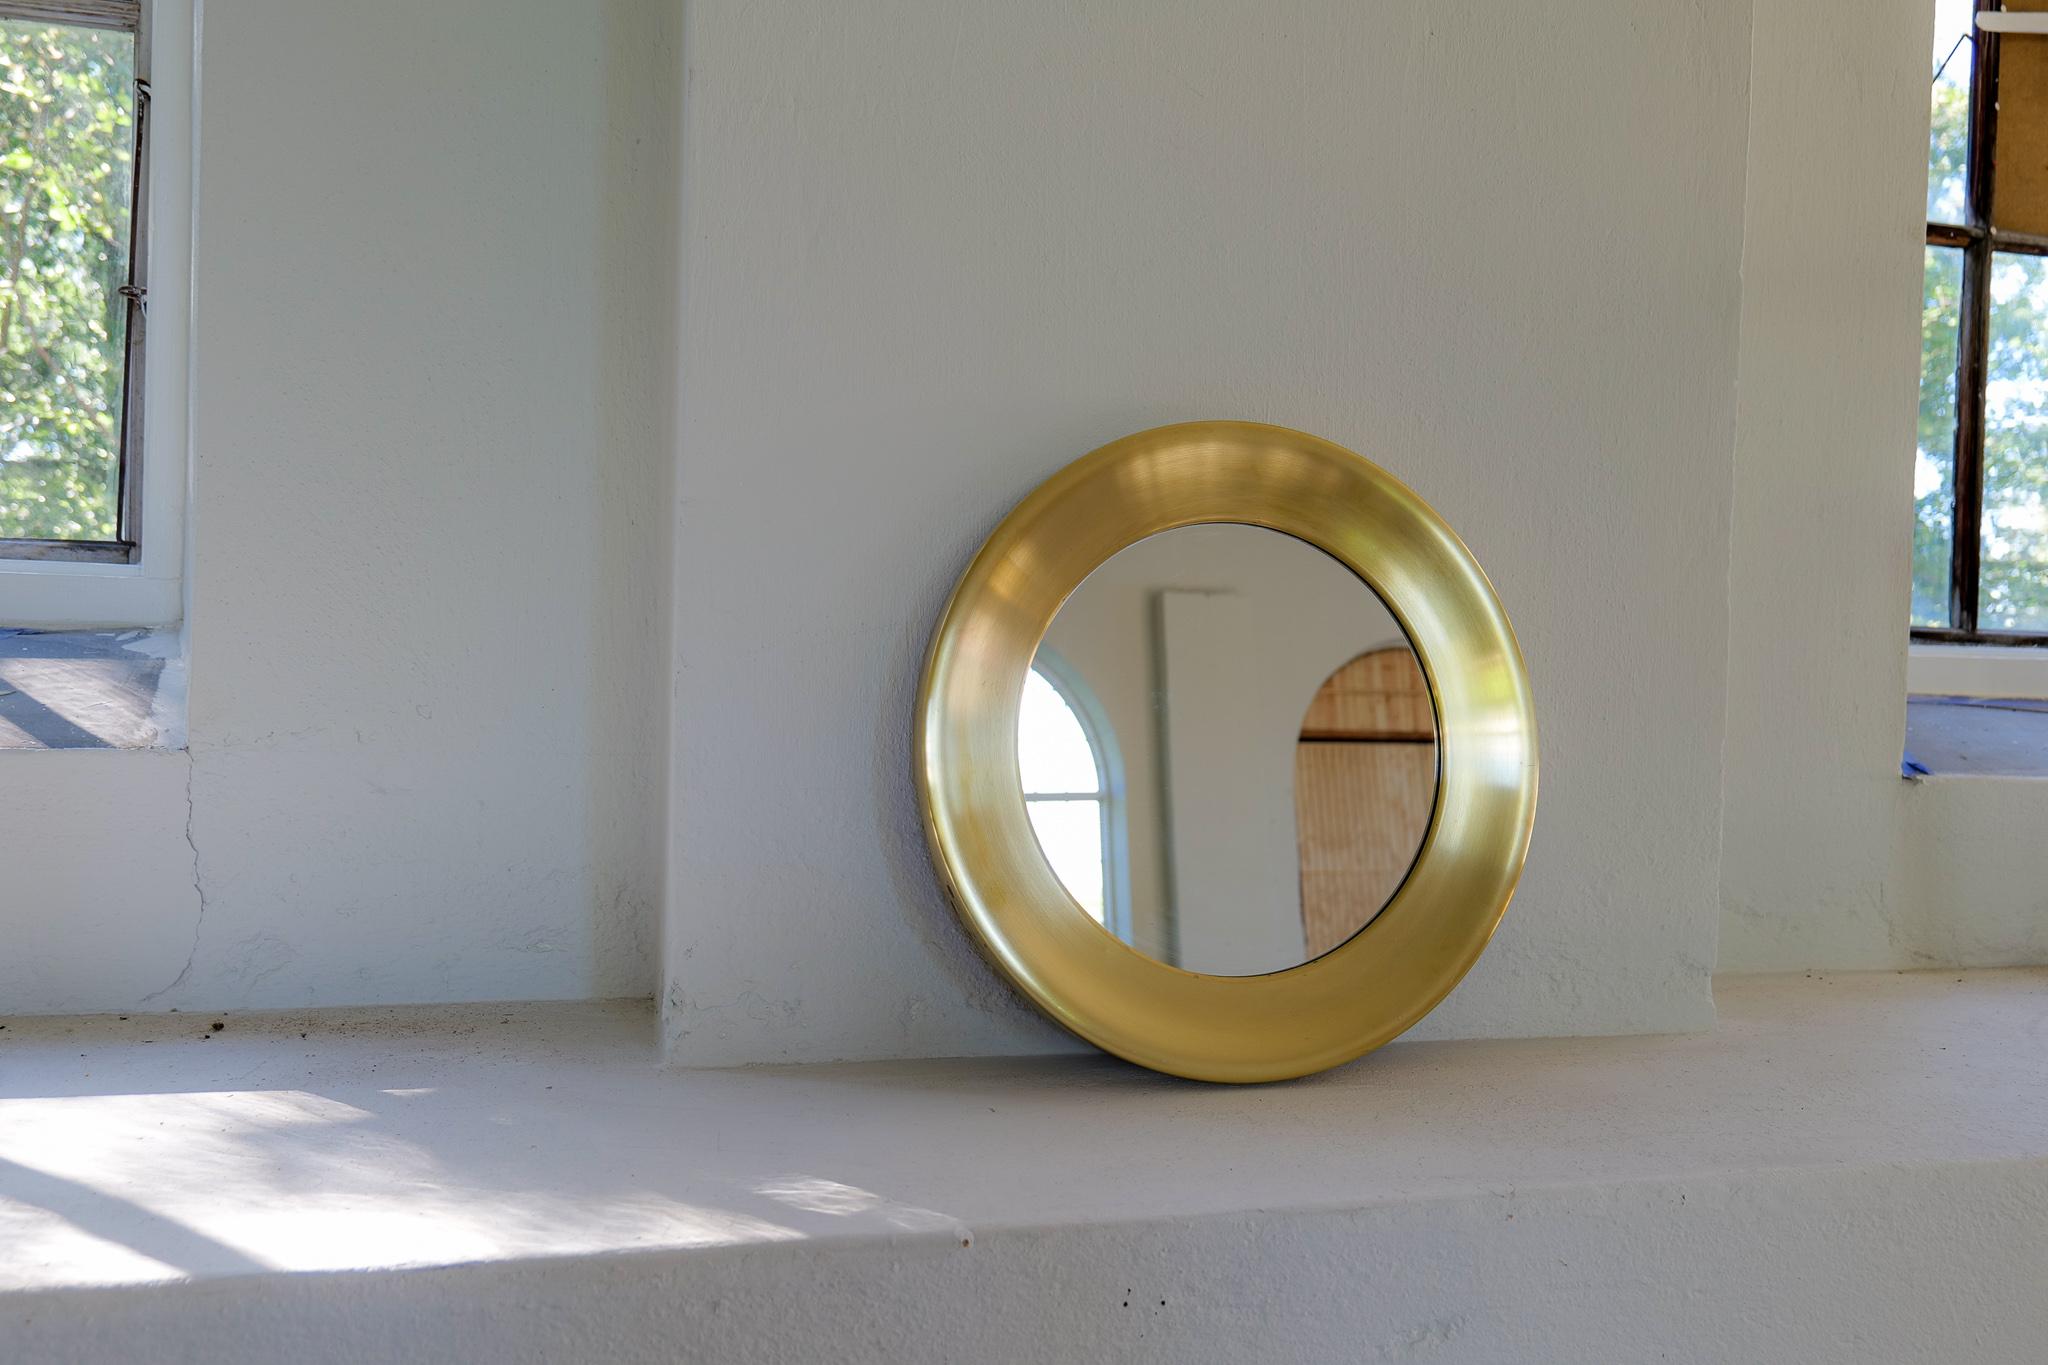 Midcentury Modern Rounded Brass Mirror by Glasmäster in Markaryd, Sweden, 1960s In Good Condition For Sale In Hillringsberg, SE